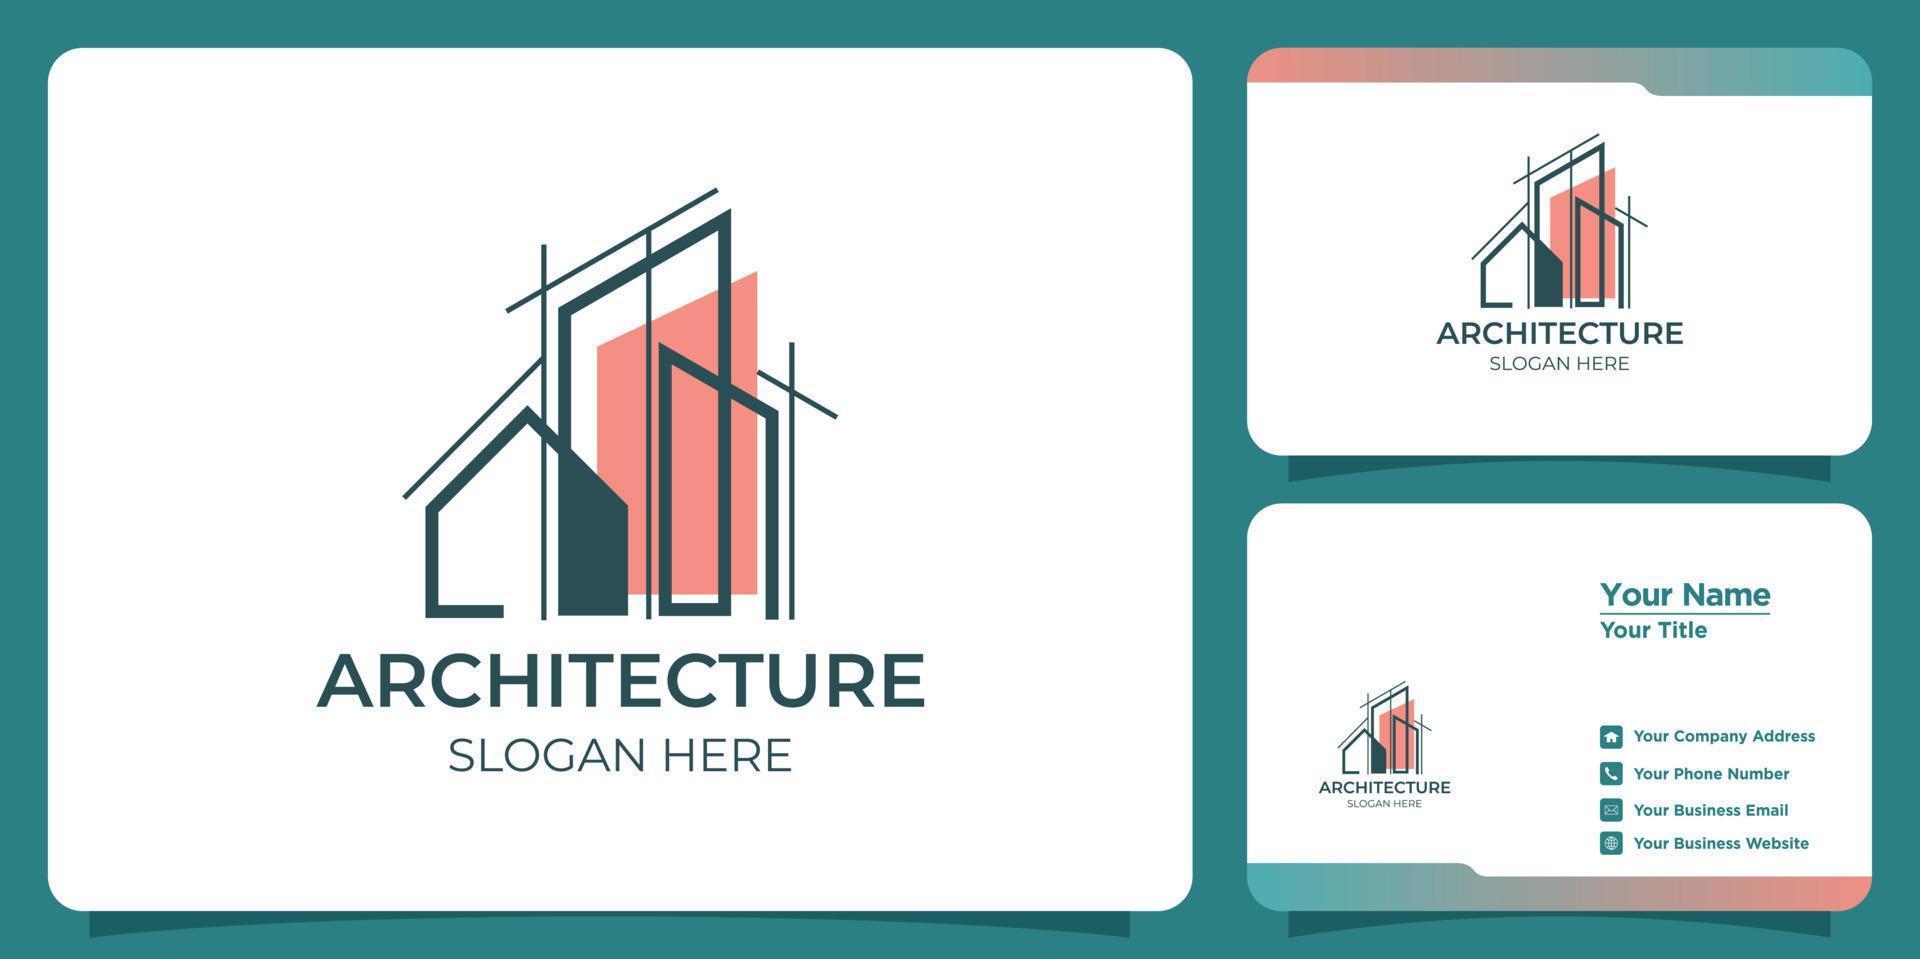 Minimalist architectural logo with art style logo design and business card template vector